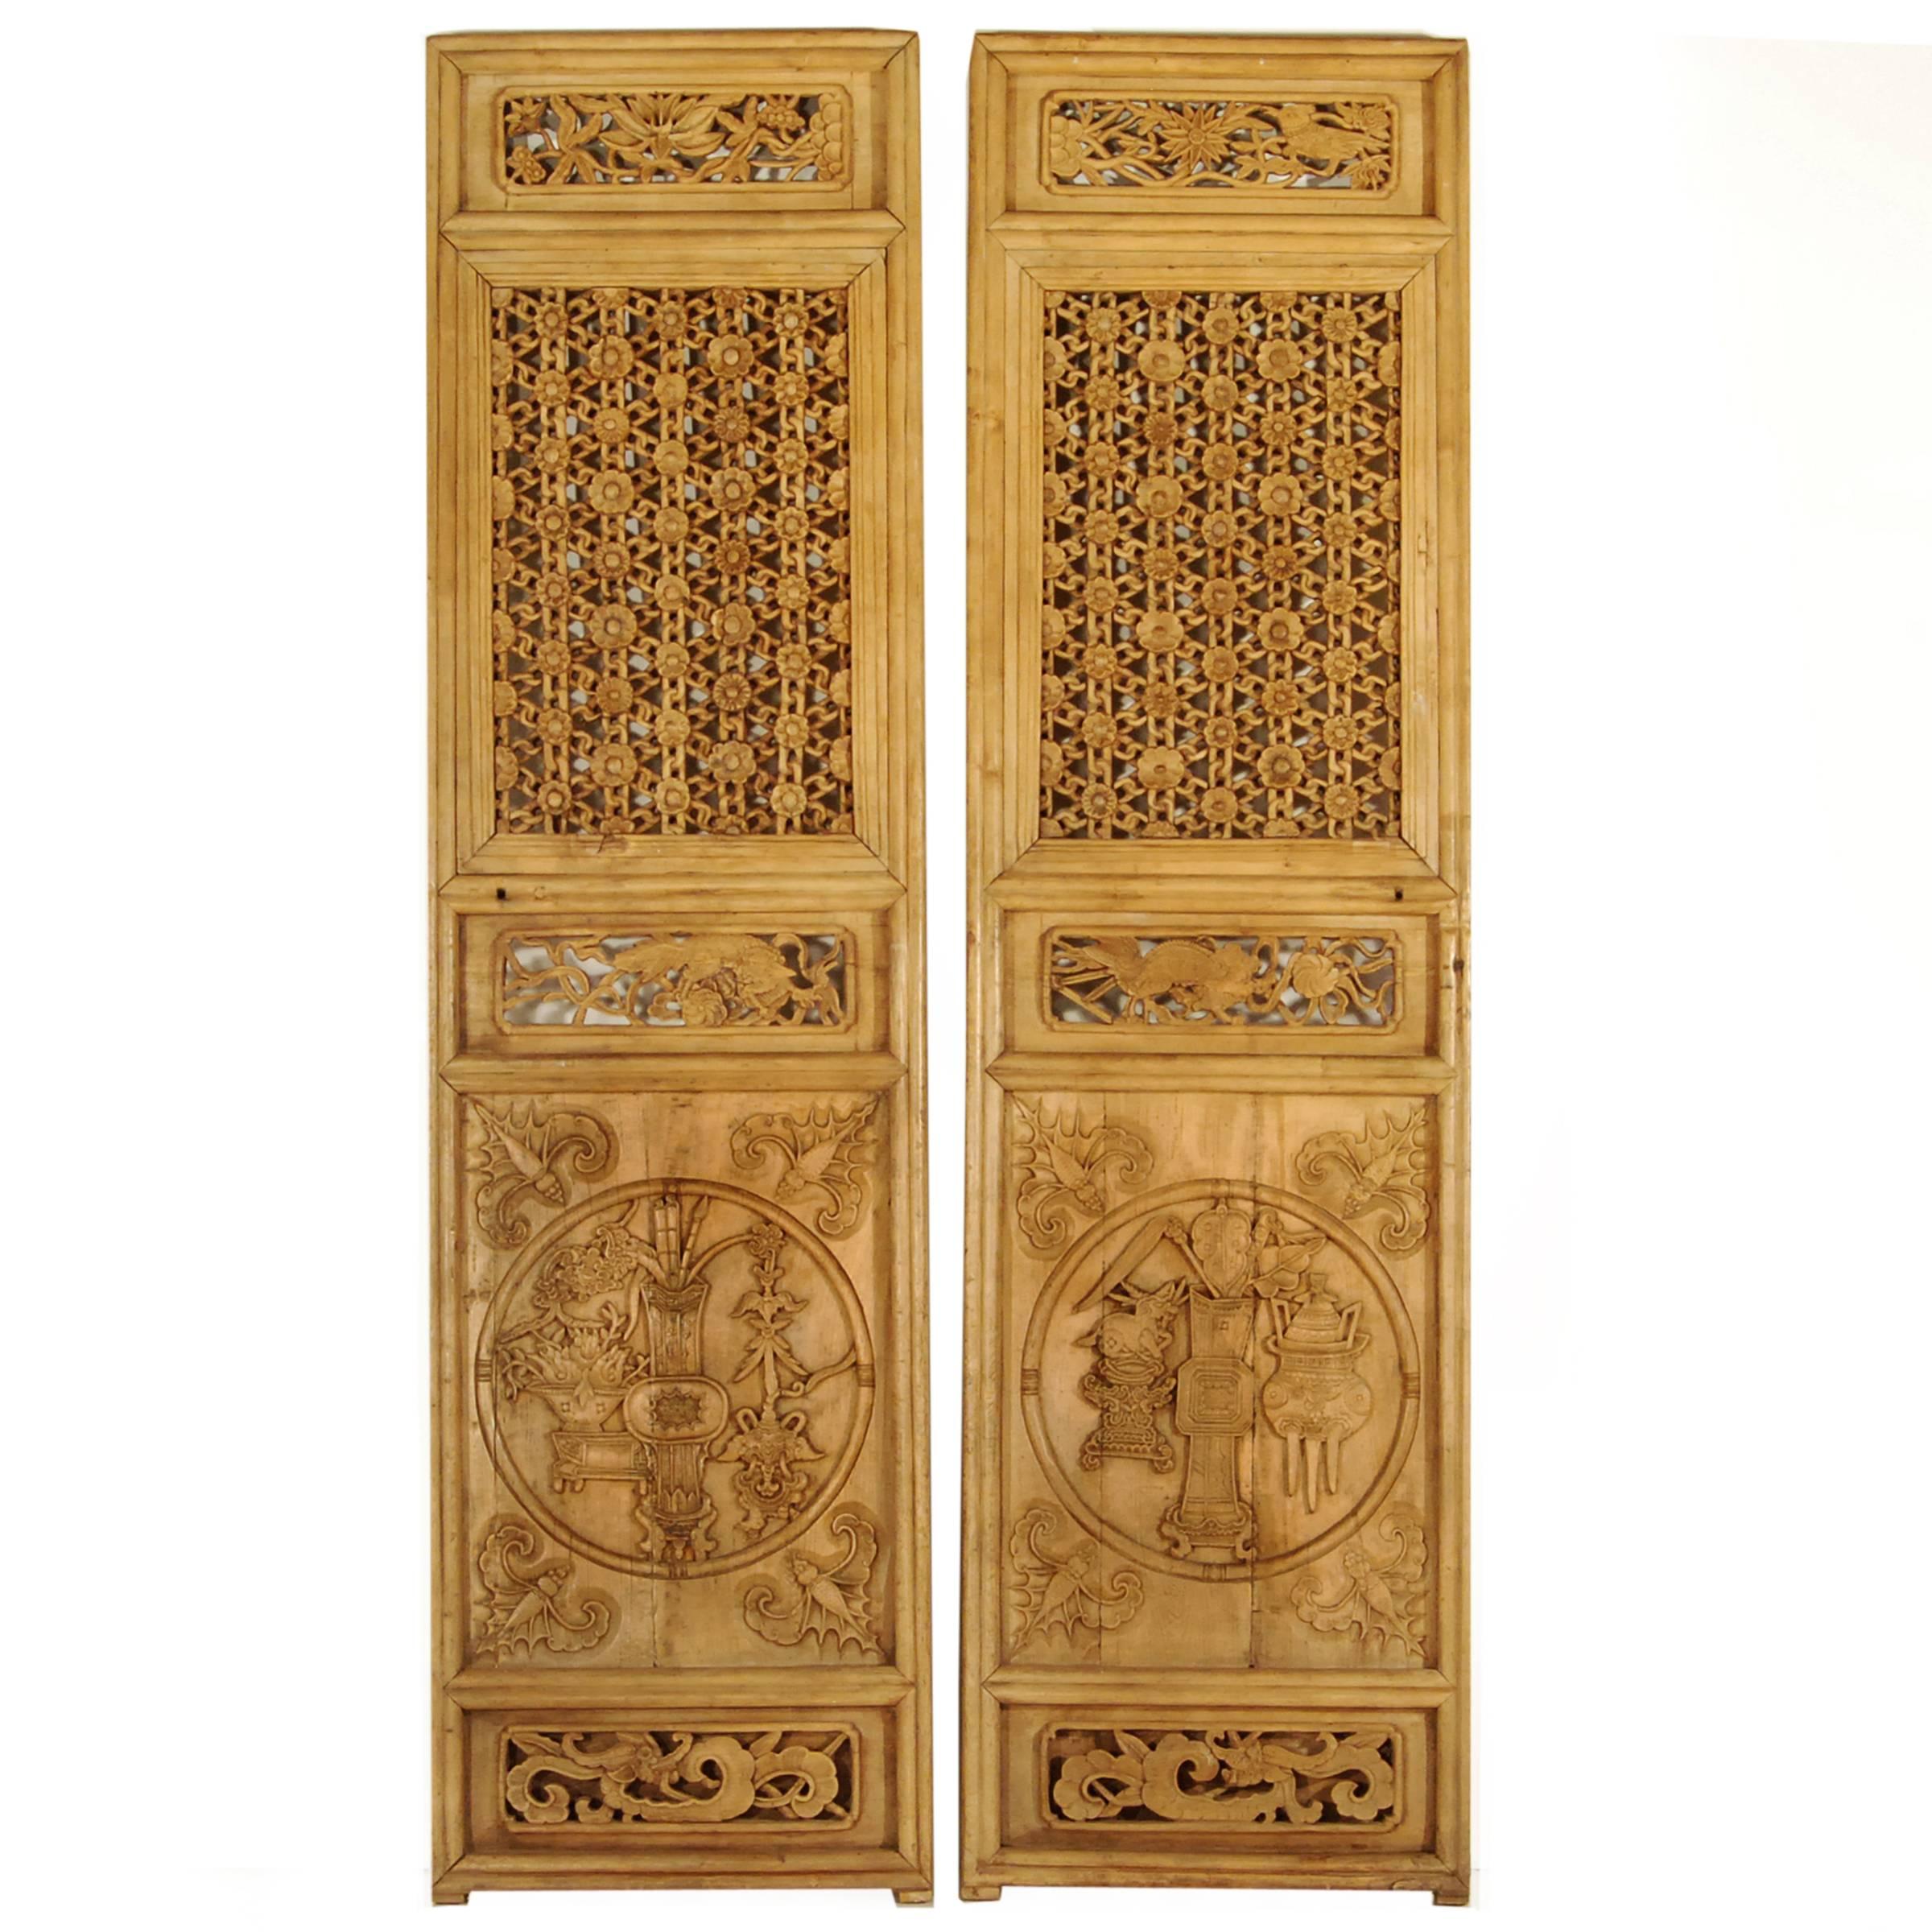 Pair of Elaborately Carved Chinese Panels